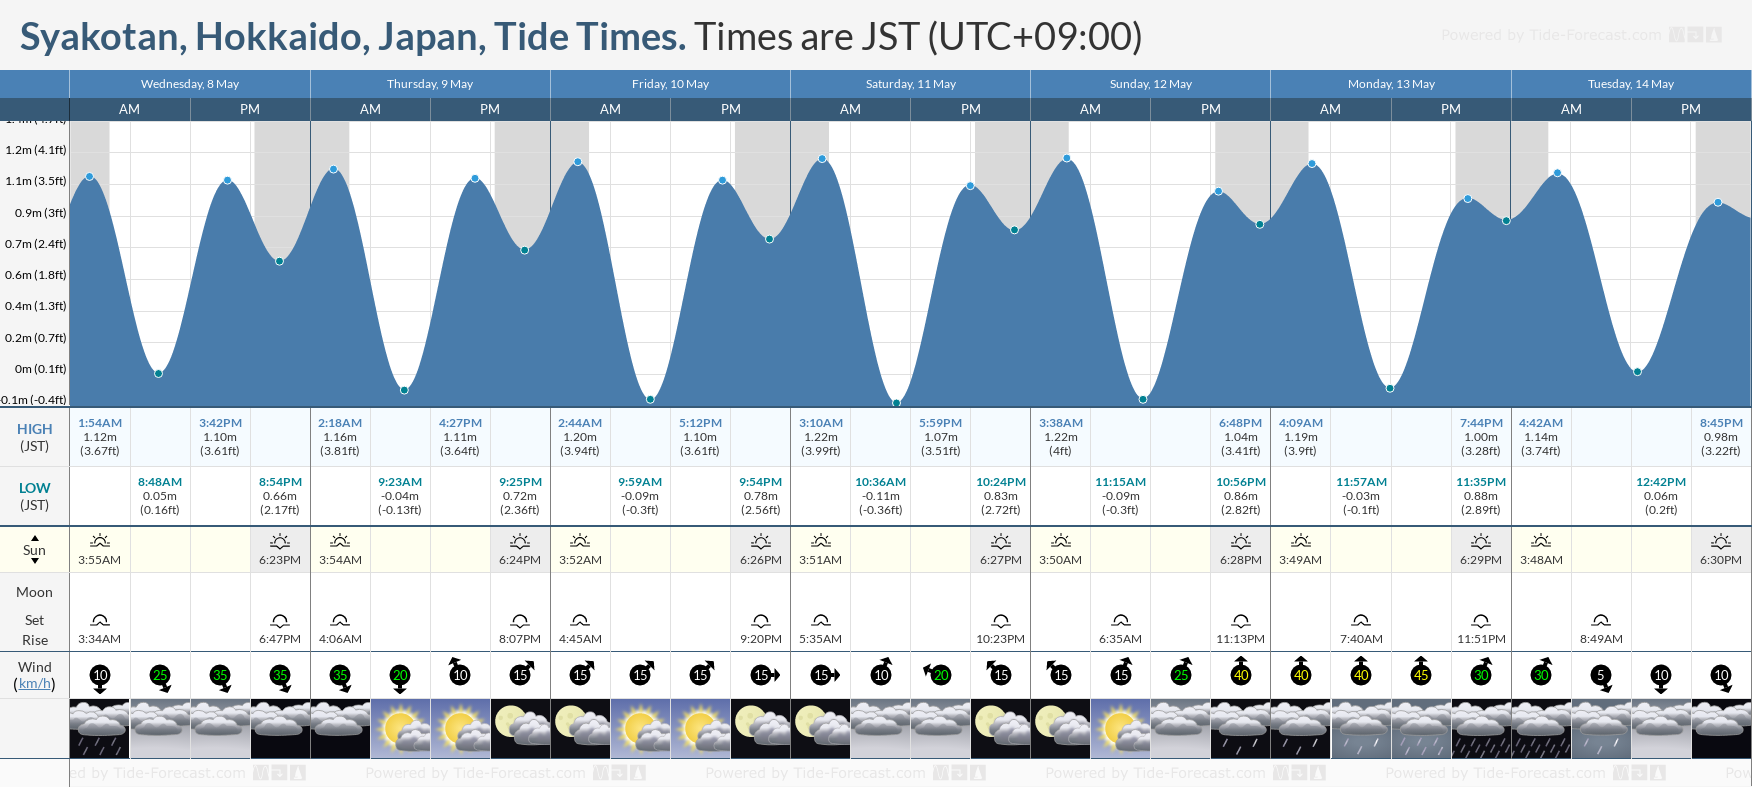 Syakotan, Hokkaido, Japan Tide Chart including high and low tide times for the next 7 days